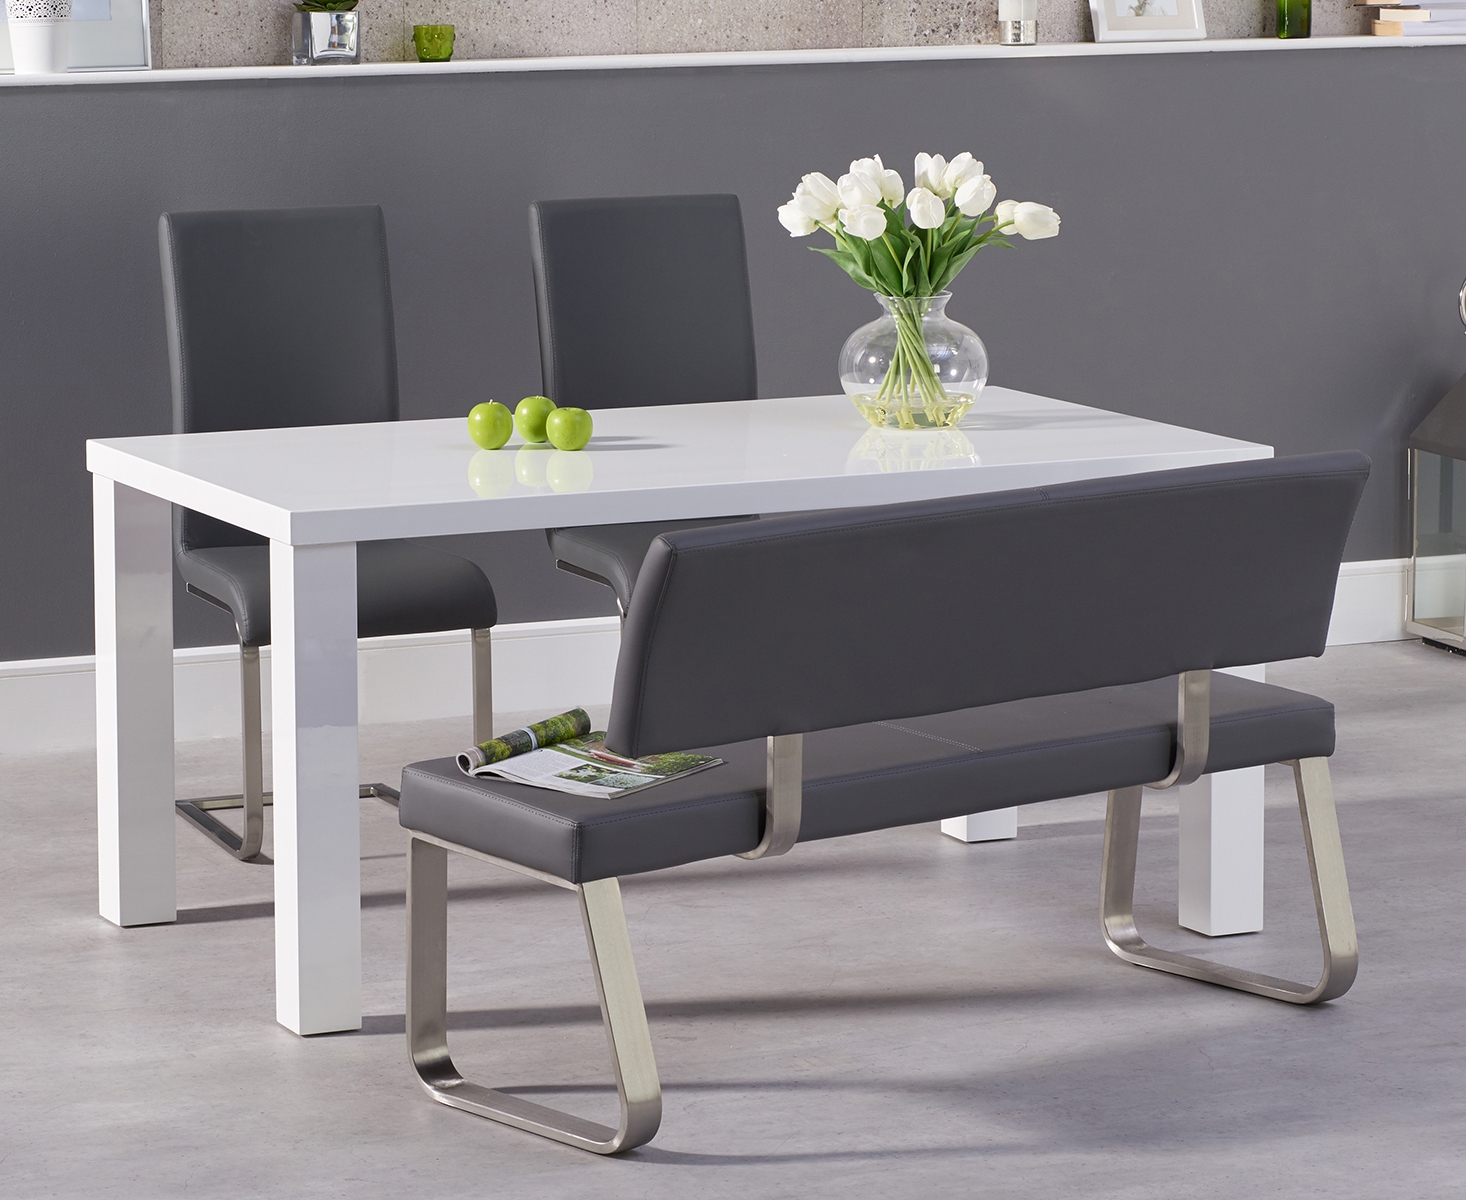 Atlanta 160cm White High Gloss Dining Table With 2 Grey Austin Chairs And 2 Malaga Grey Benches